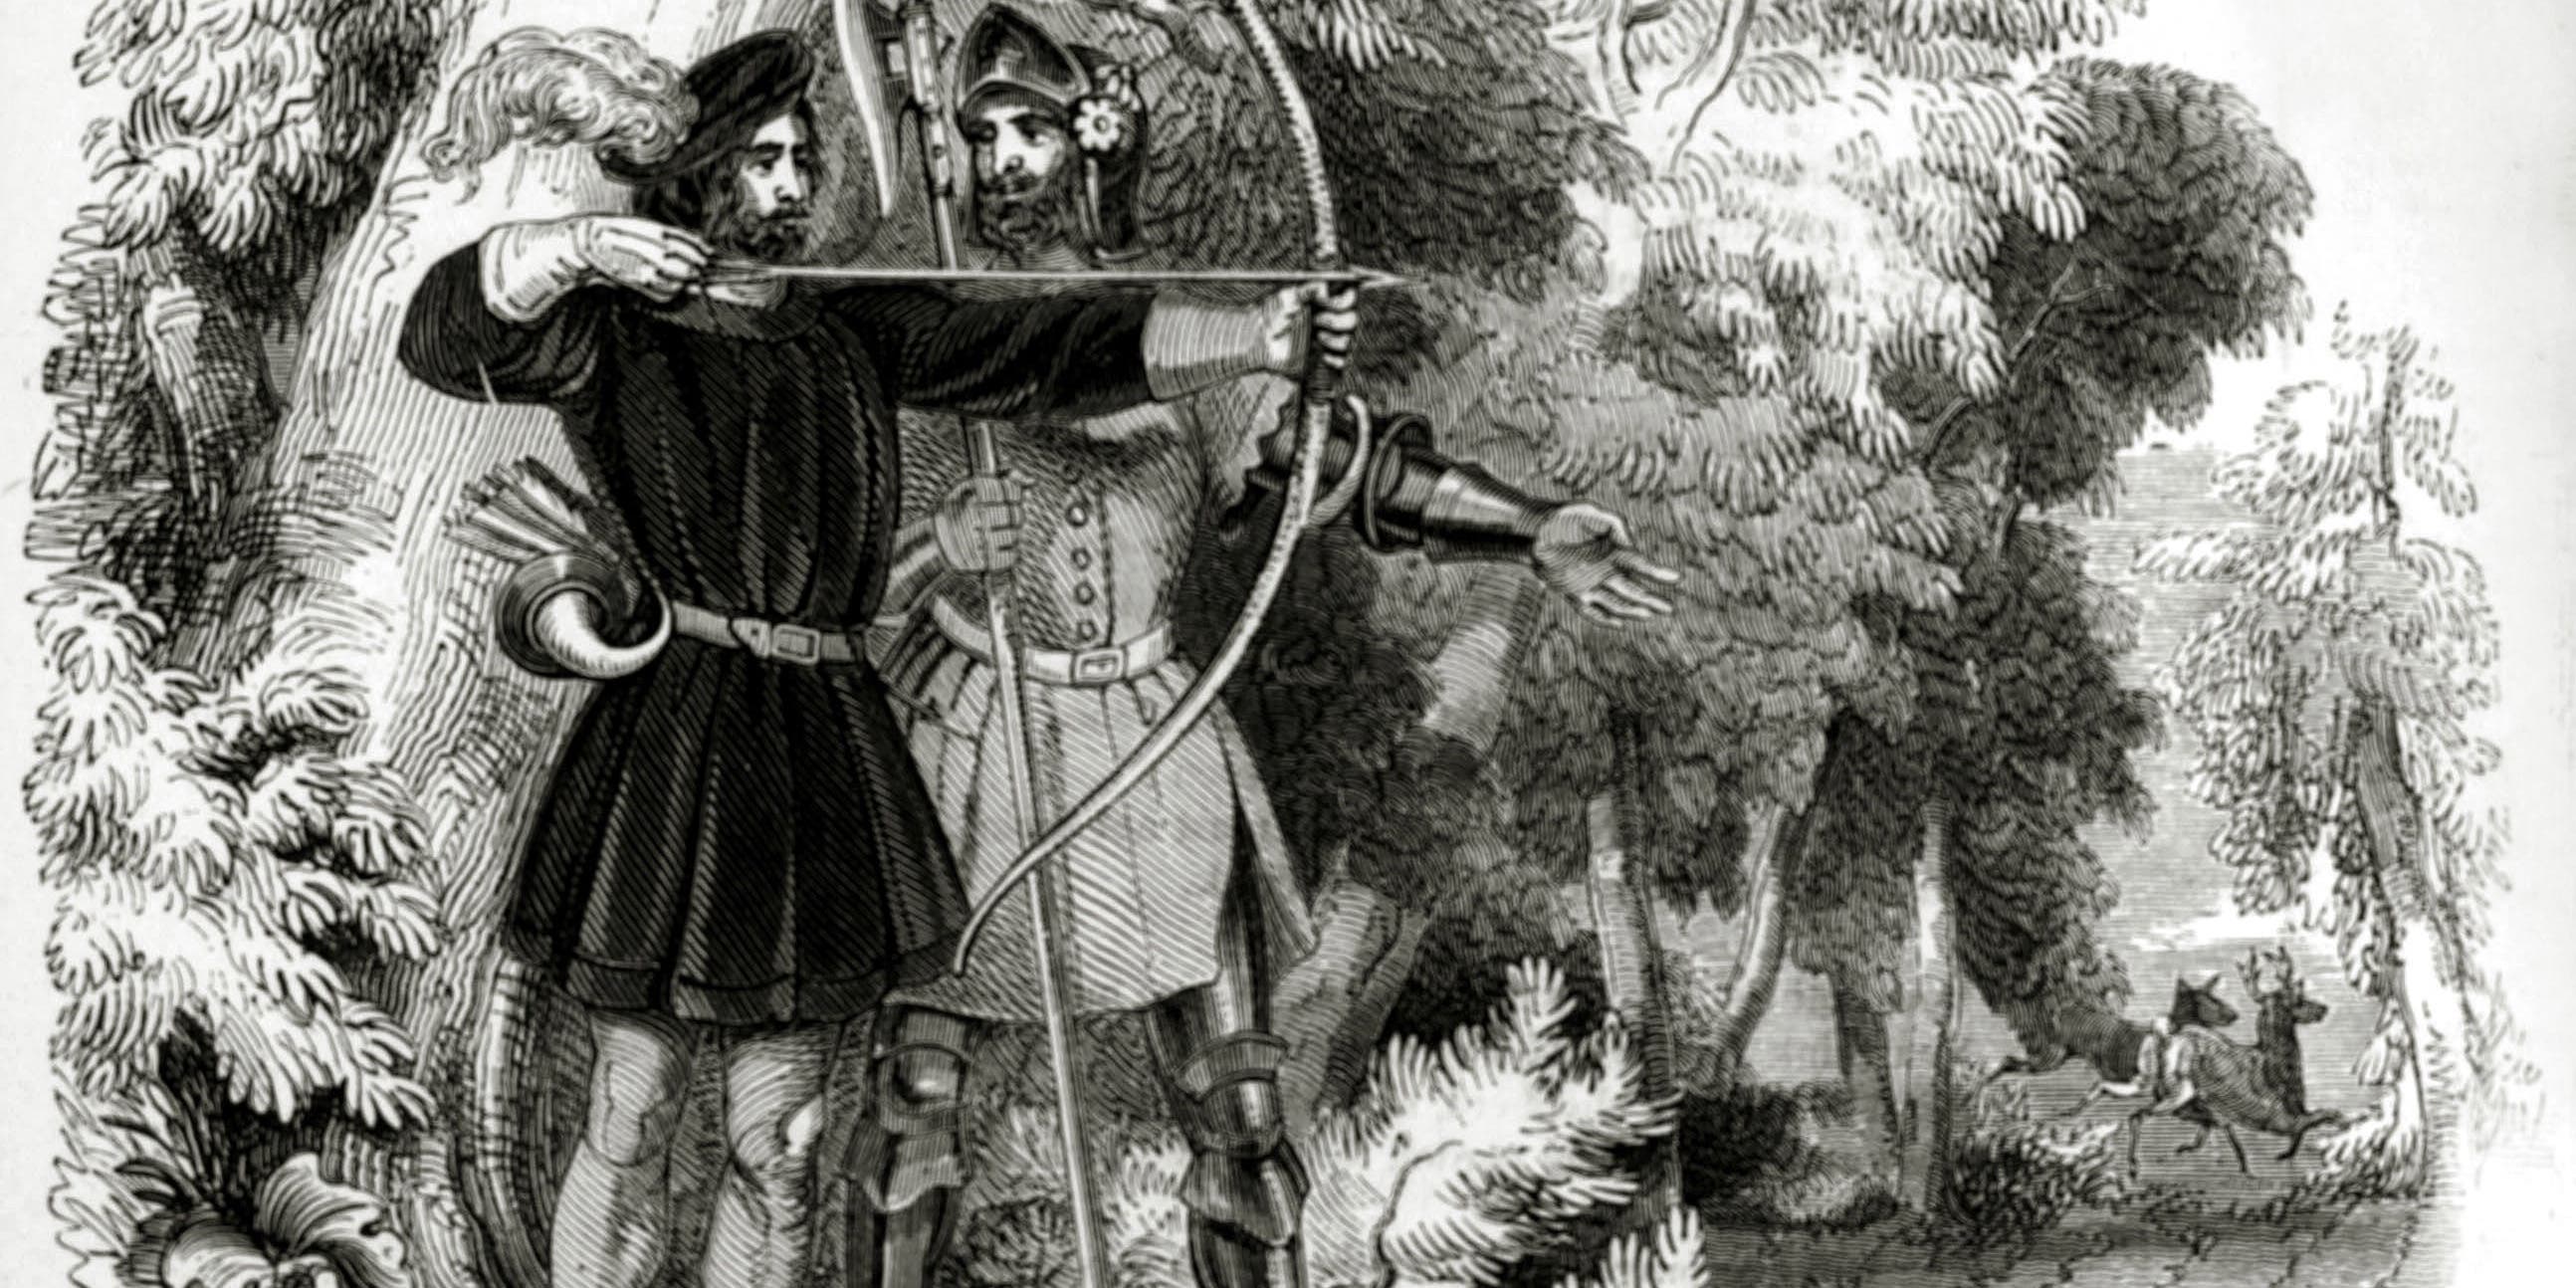 English History, Illustration, pic: circa 1200, Robin Hood and Little John, Legend has it that Robin Hood and his men who were thought to operate from Sherwood Forest, robbed from the rich to give to the poor (Photo by Bob Thomas/Popperfoto via Getty Images/Getty Images)